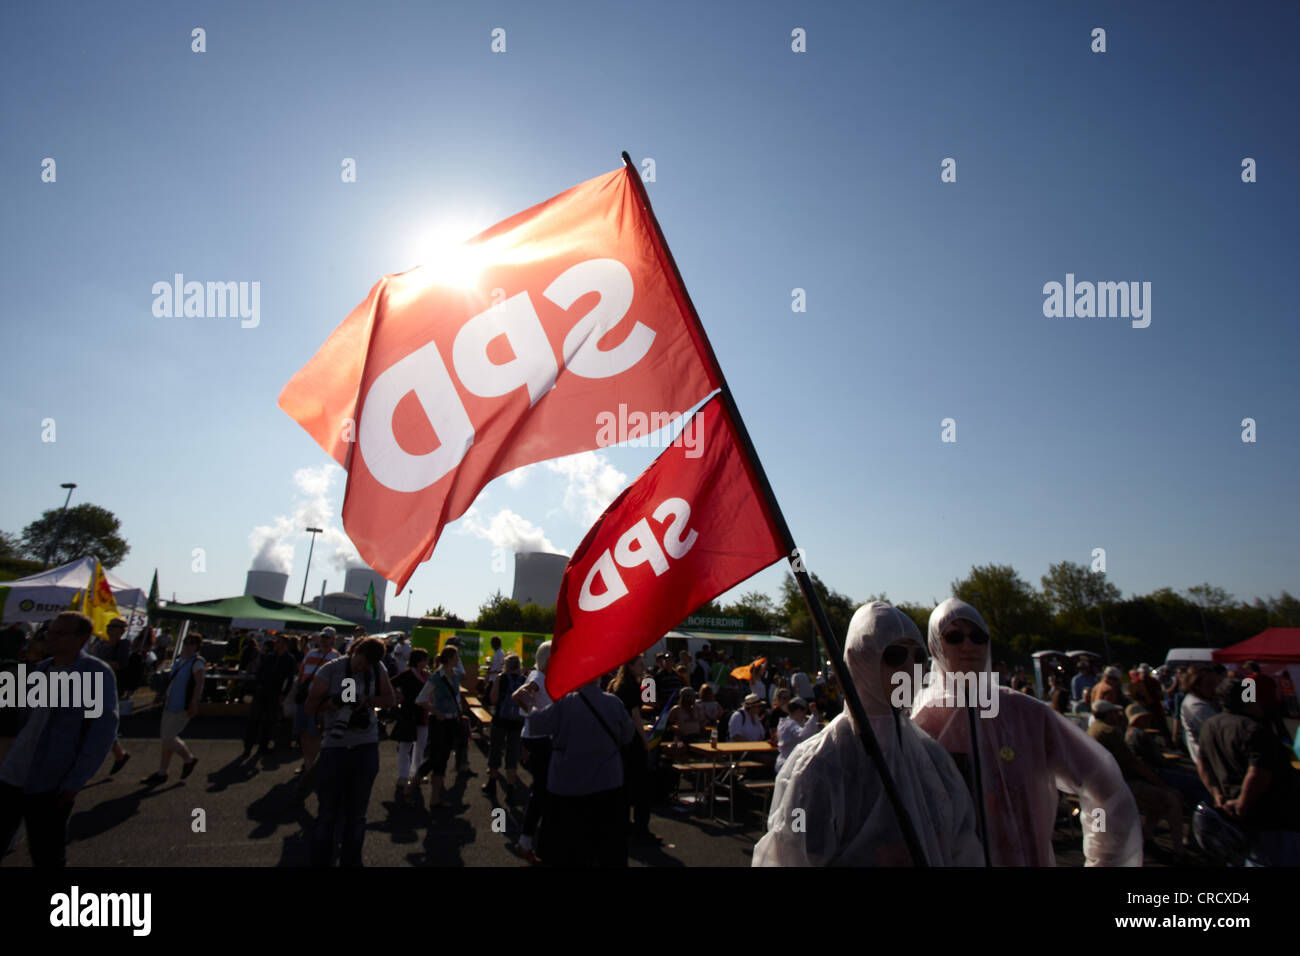 Protest in front of the French Cattenom Nuclear Power Plant, Lorraine region, France, Europe Stock Photo